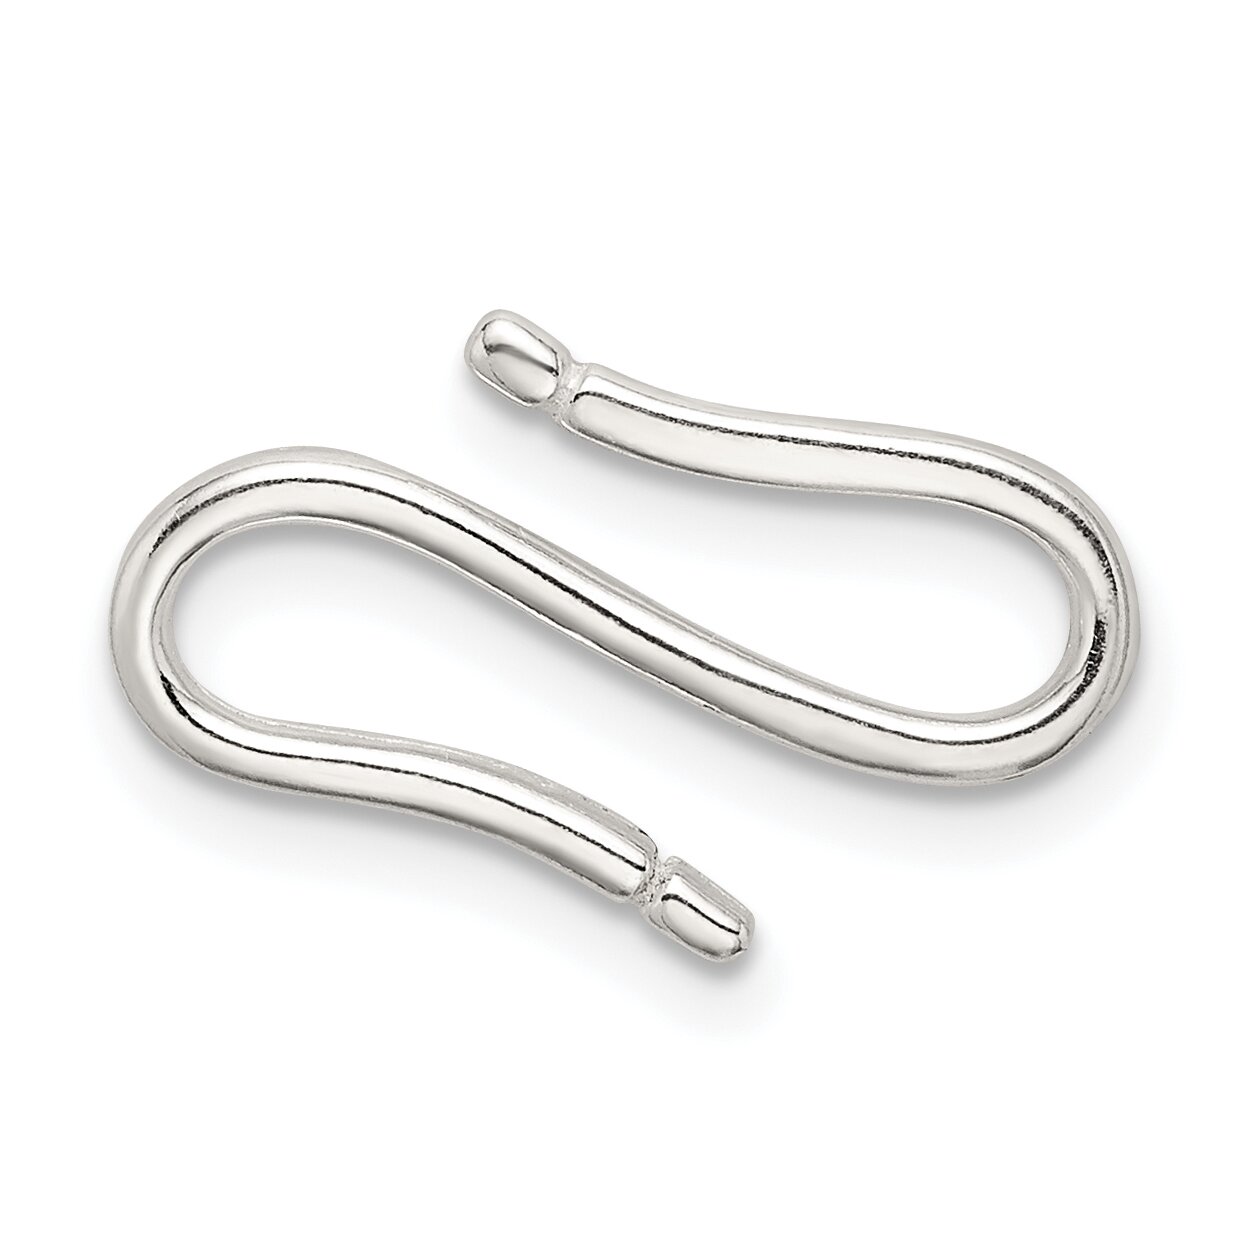 Sterling Silver S Hook Clasp 17.8mm - Pack of 4